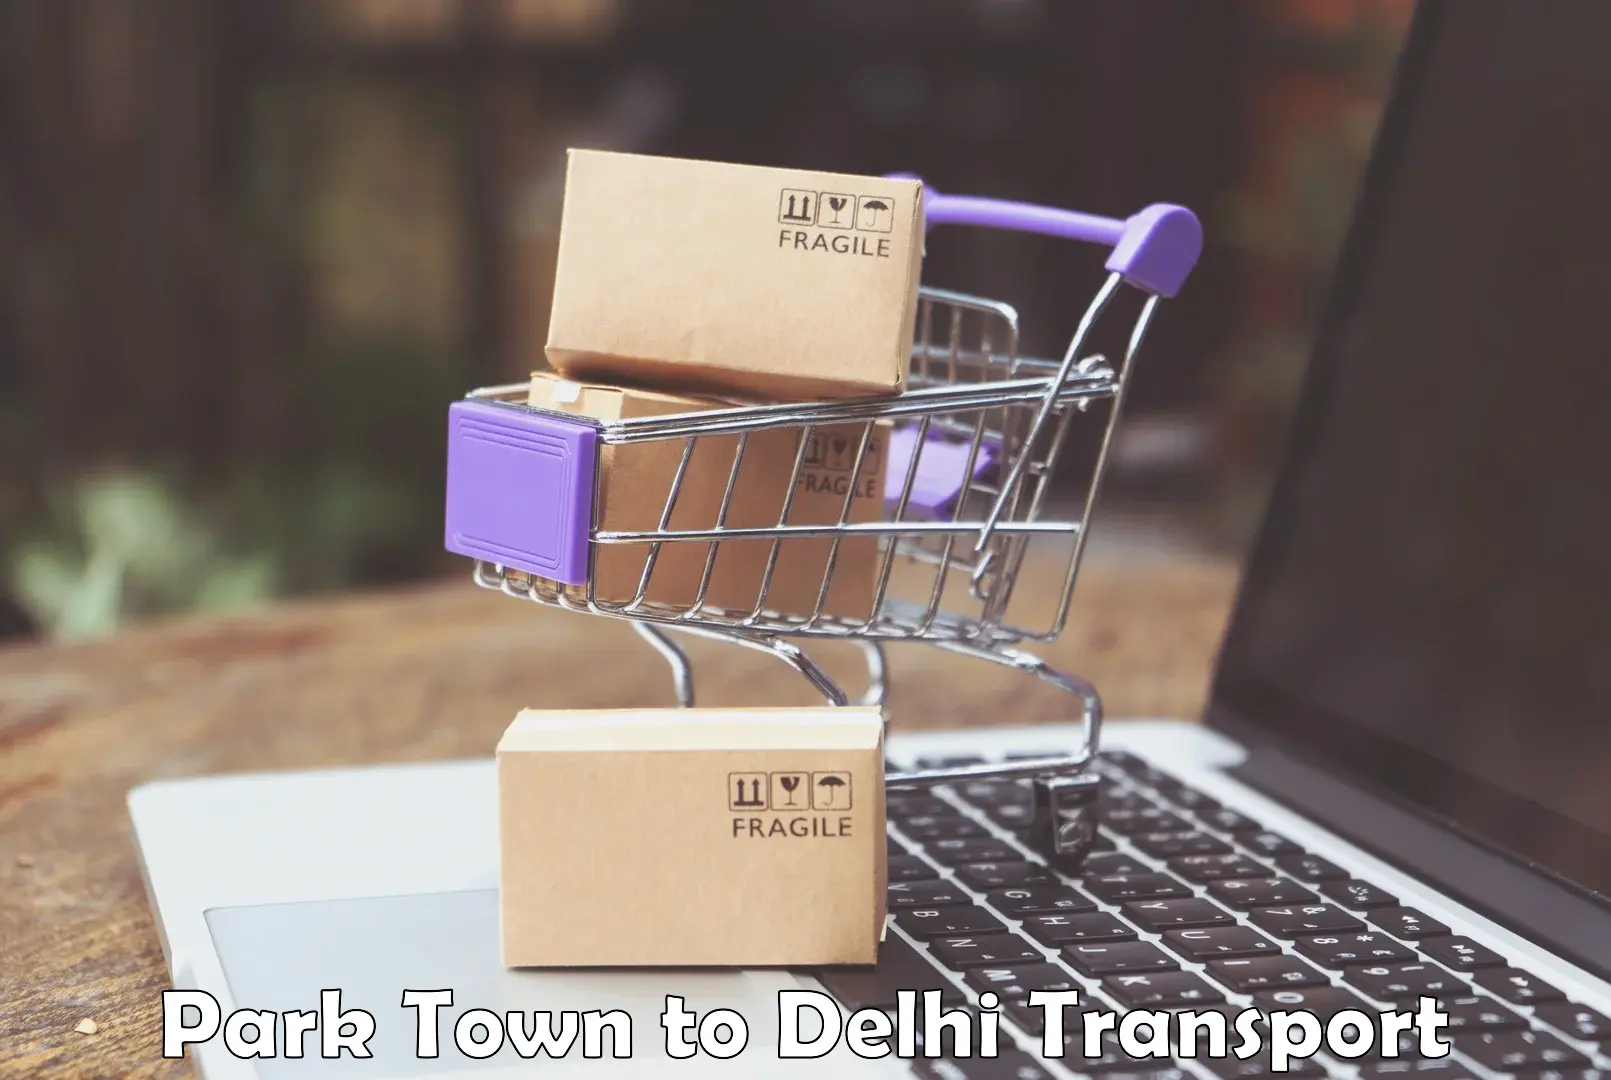 Transport bike from one state to another Park Town to Krishna Nagar